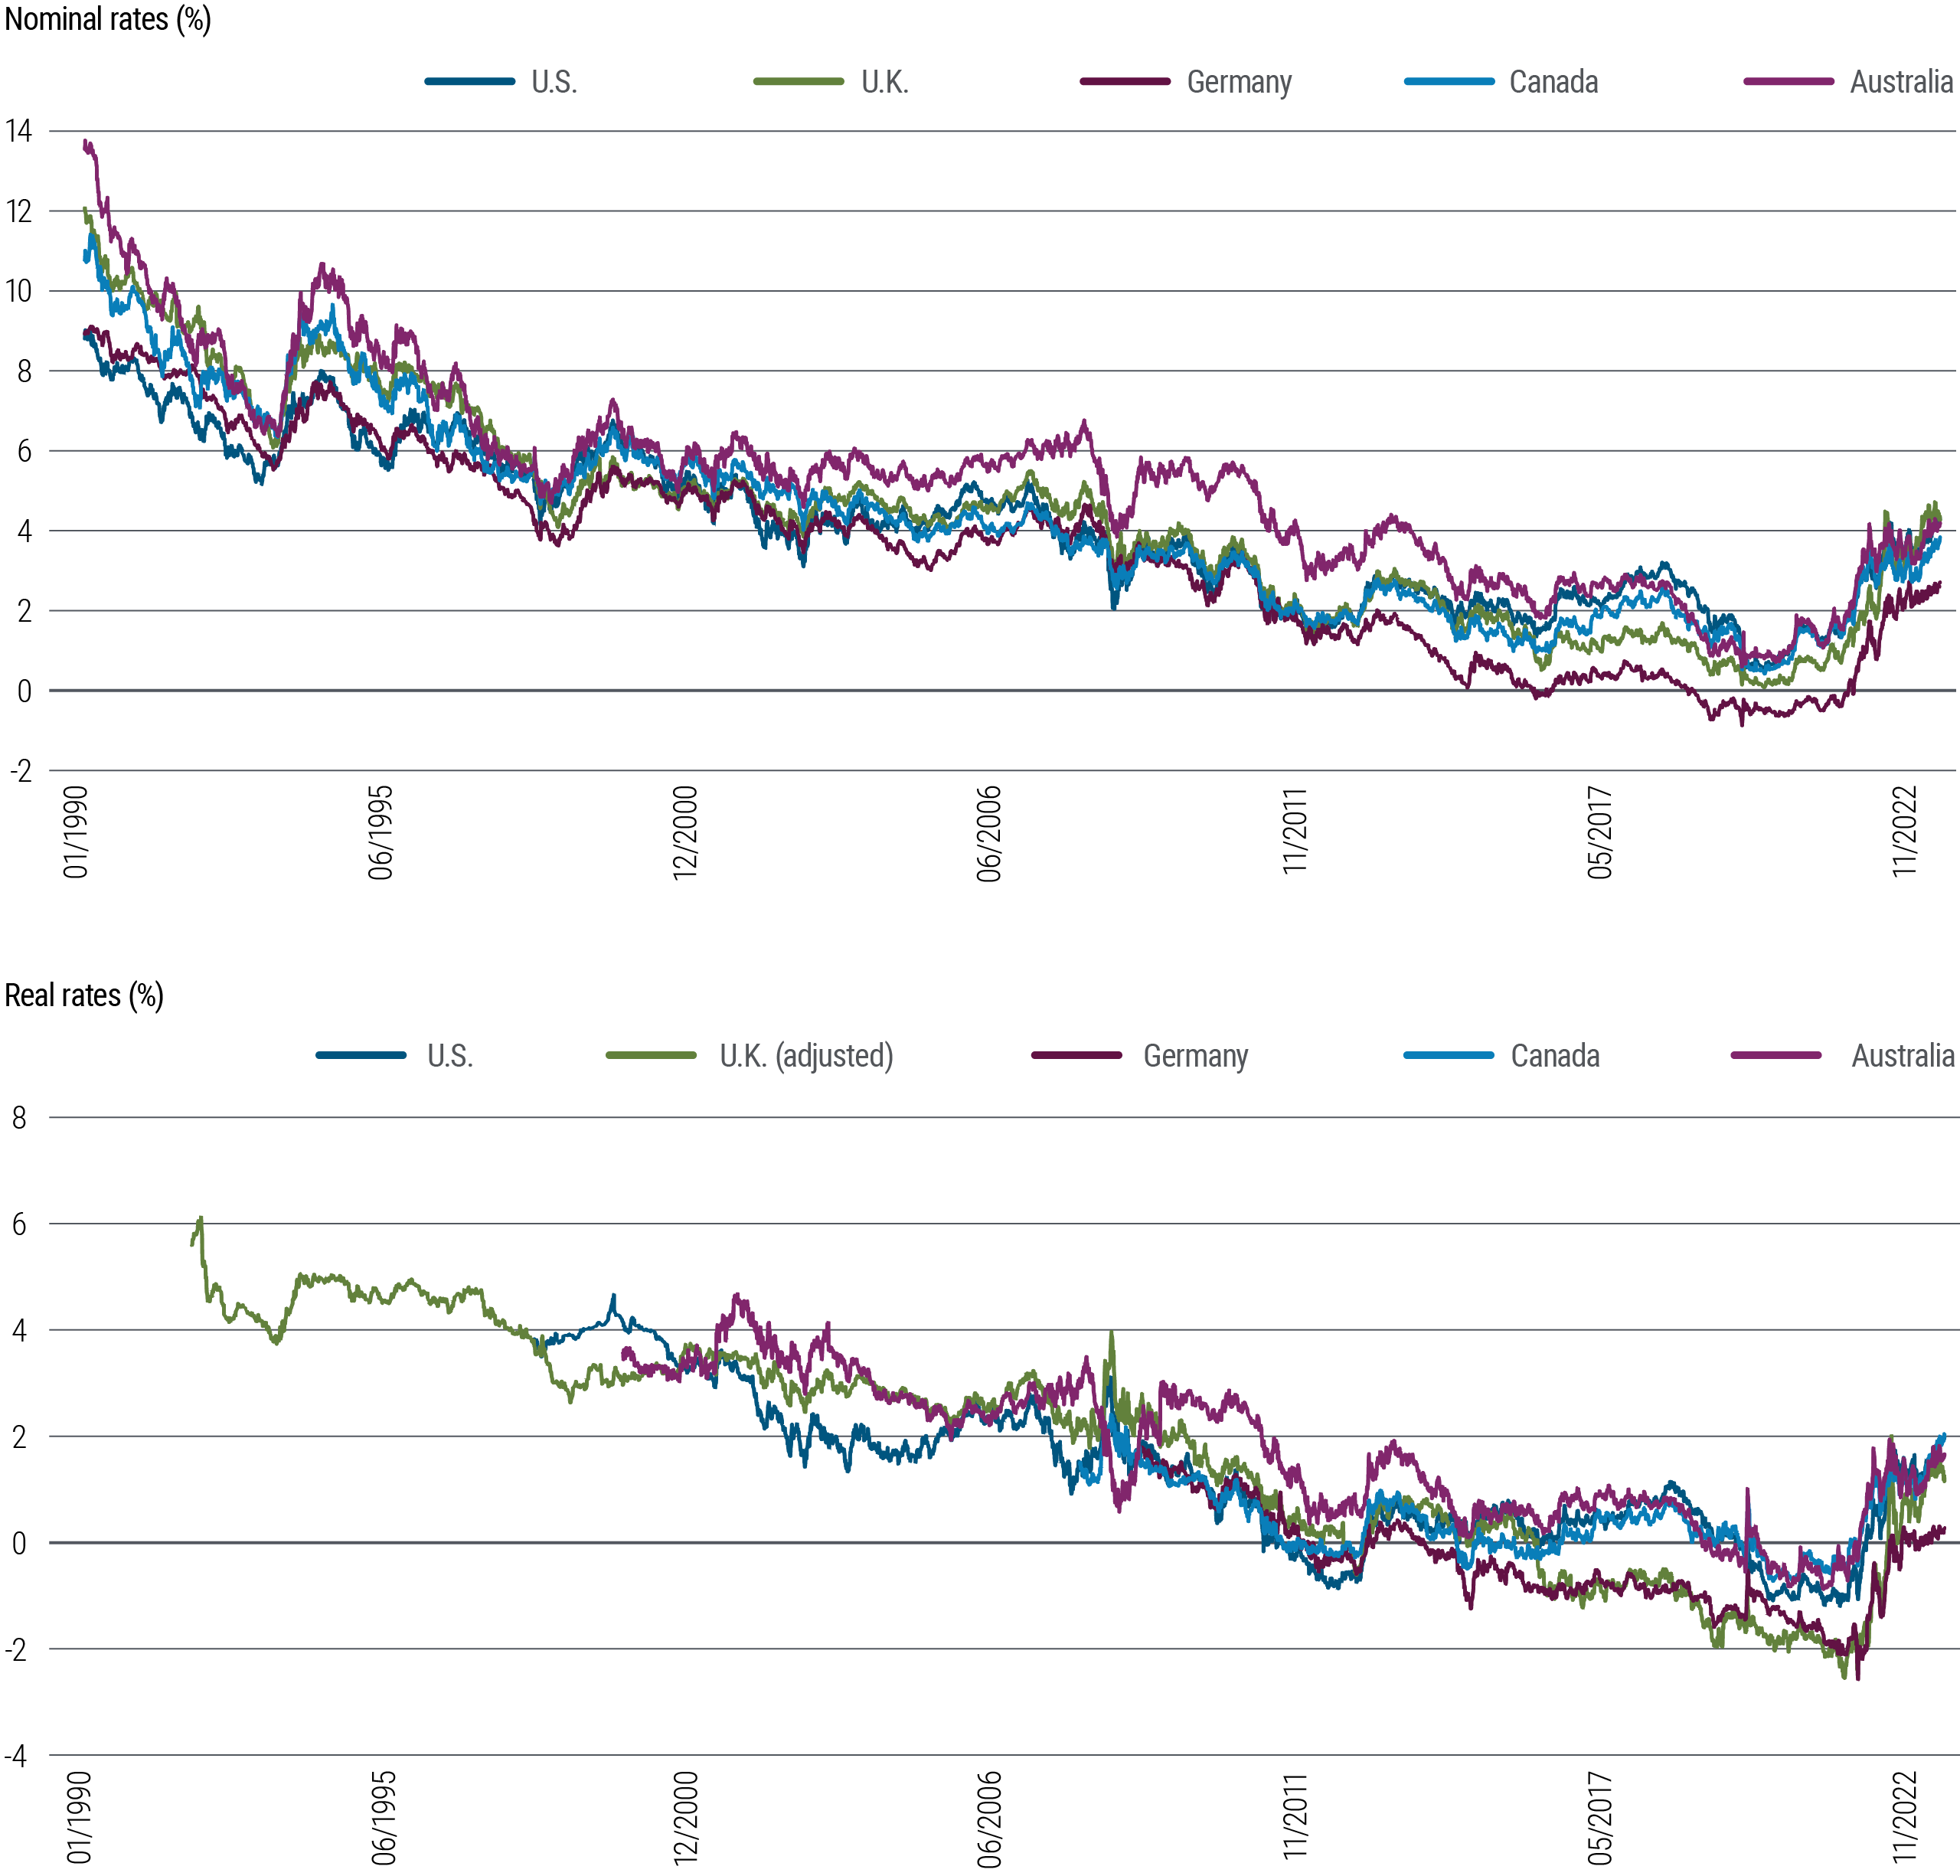 Figure 4 is two line charts. The first chart shows 10-year nominal interest rates in 5 developed market countries (U.S., U.K., Germany, Canada, and Australia) from 1990 through September 2023. In that time frame, nominal yields fluctuated some but along a downward trend from about 9%–14% in 1990 to a low hovering around zero in 2020, around the pandemic. They have since risen into a range from above 2% to above 4%. The second chart shows 10-year real rates for the same countries over the same time frame. Real rates generally and gradually dropped for much of that period, then rose rapidly following the pandemic, slowing those gains more recently but still off their lows and in a range of 0.5%–2.5%. Data source is PIMCO and Bloomberg as of 2 October 2023.